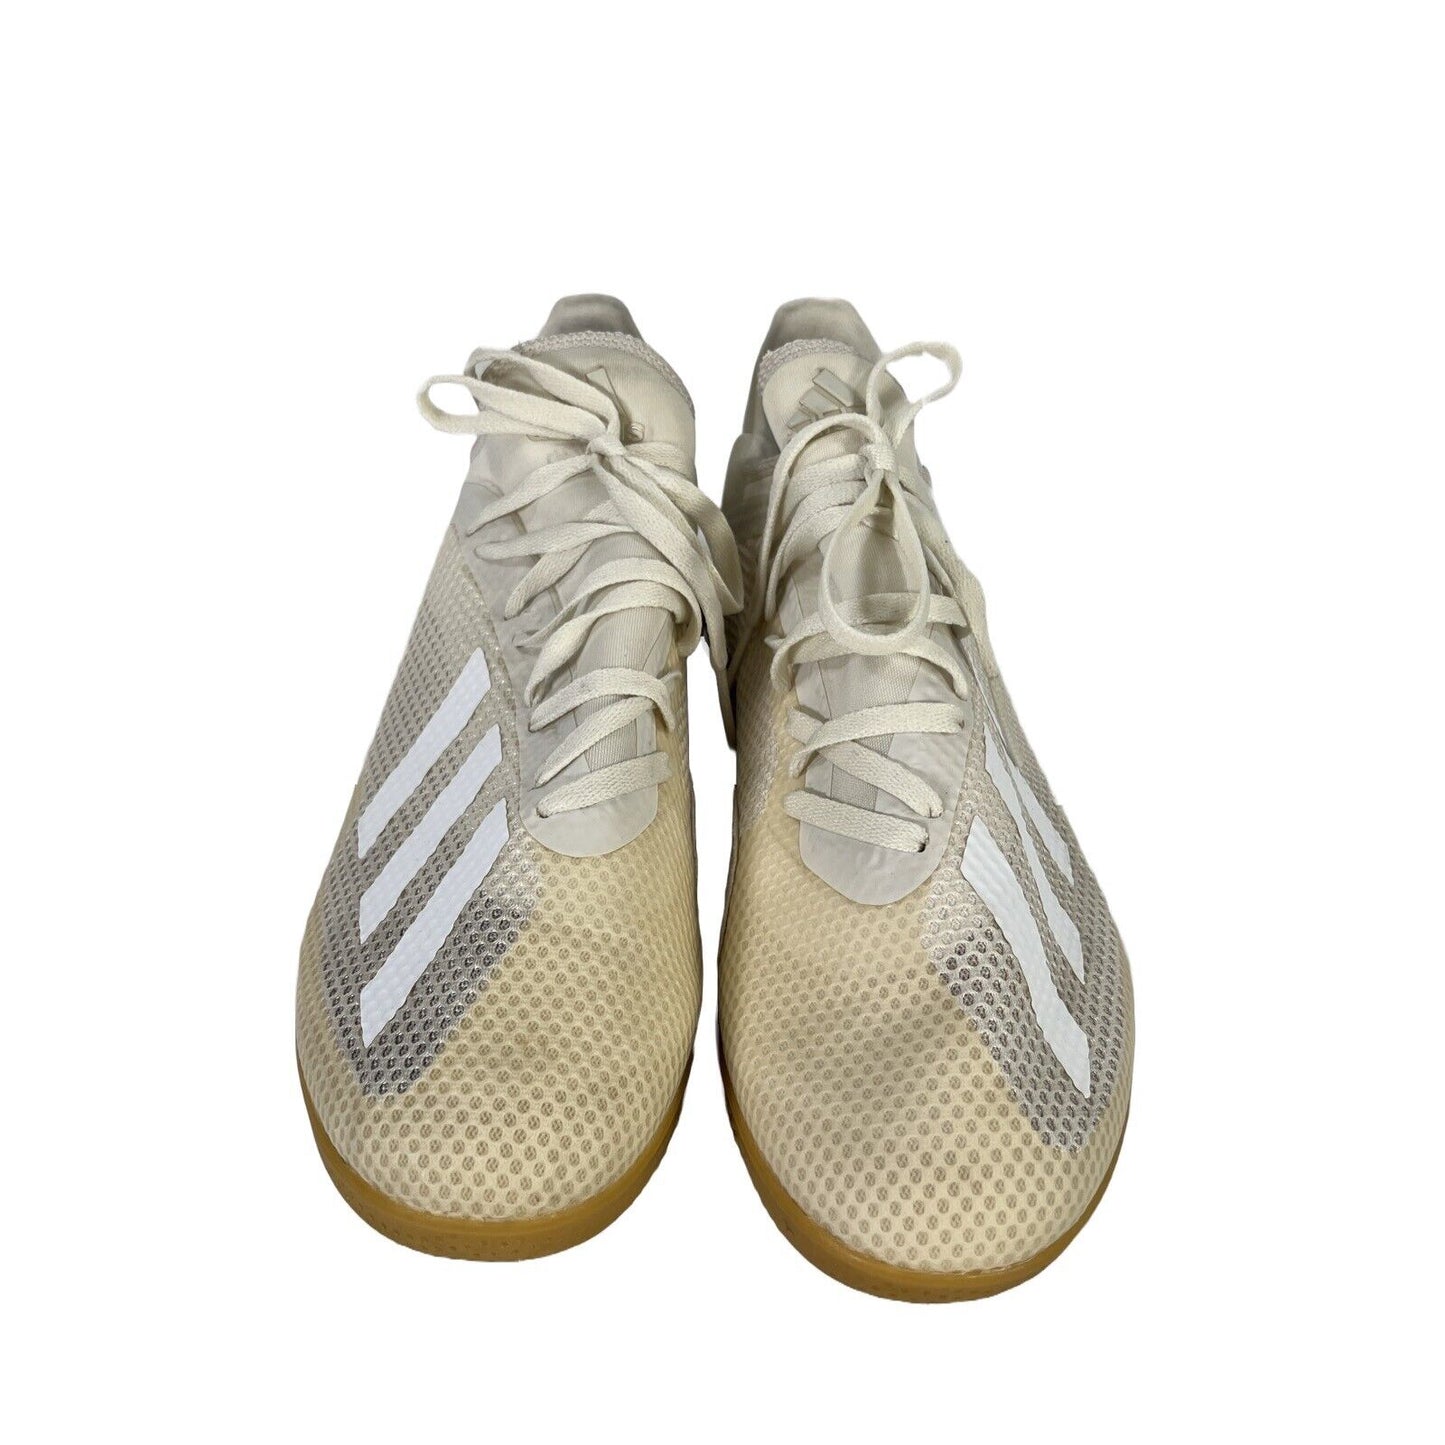 adidas Men's White X Tango Lace Up Athletic Turf Soccer Shoes - 8.5